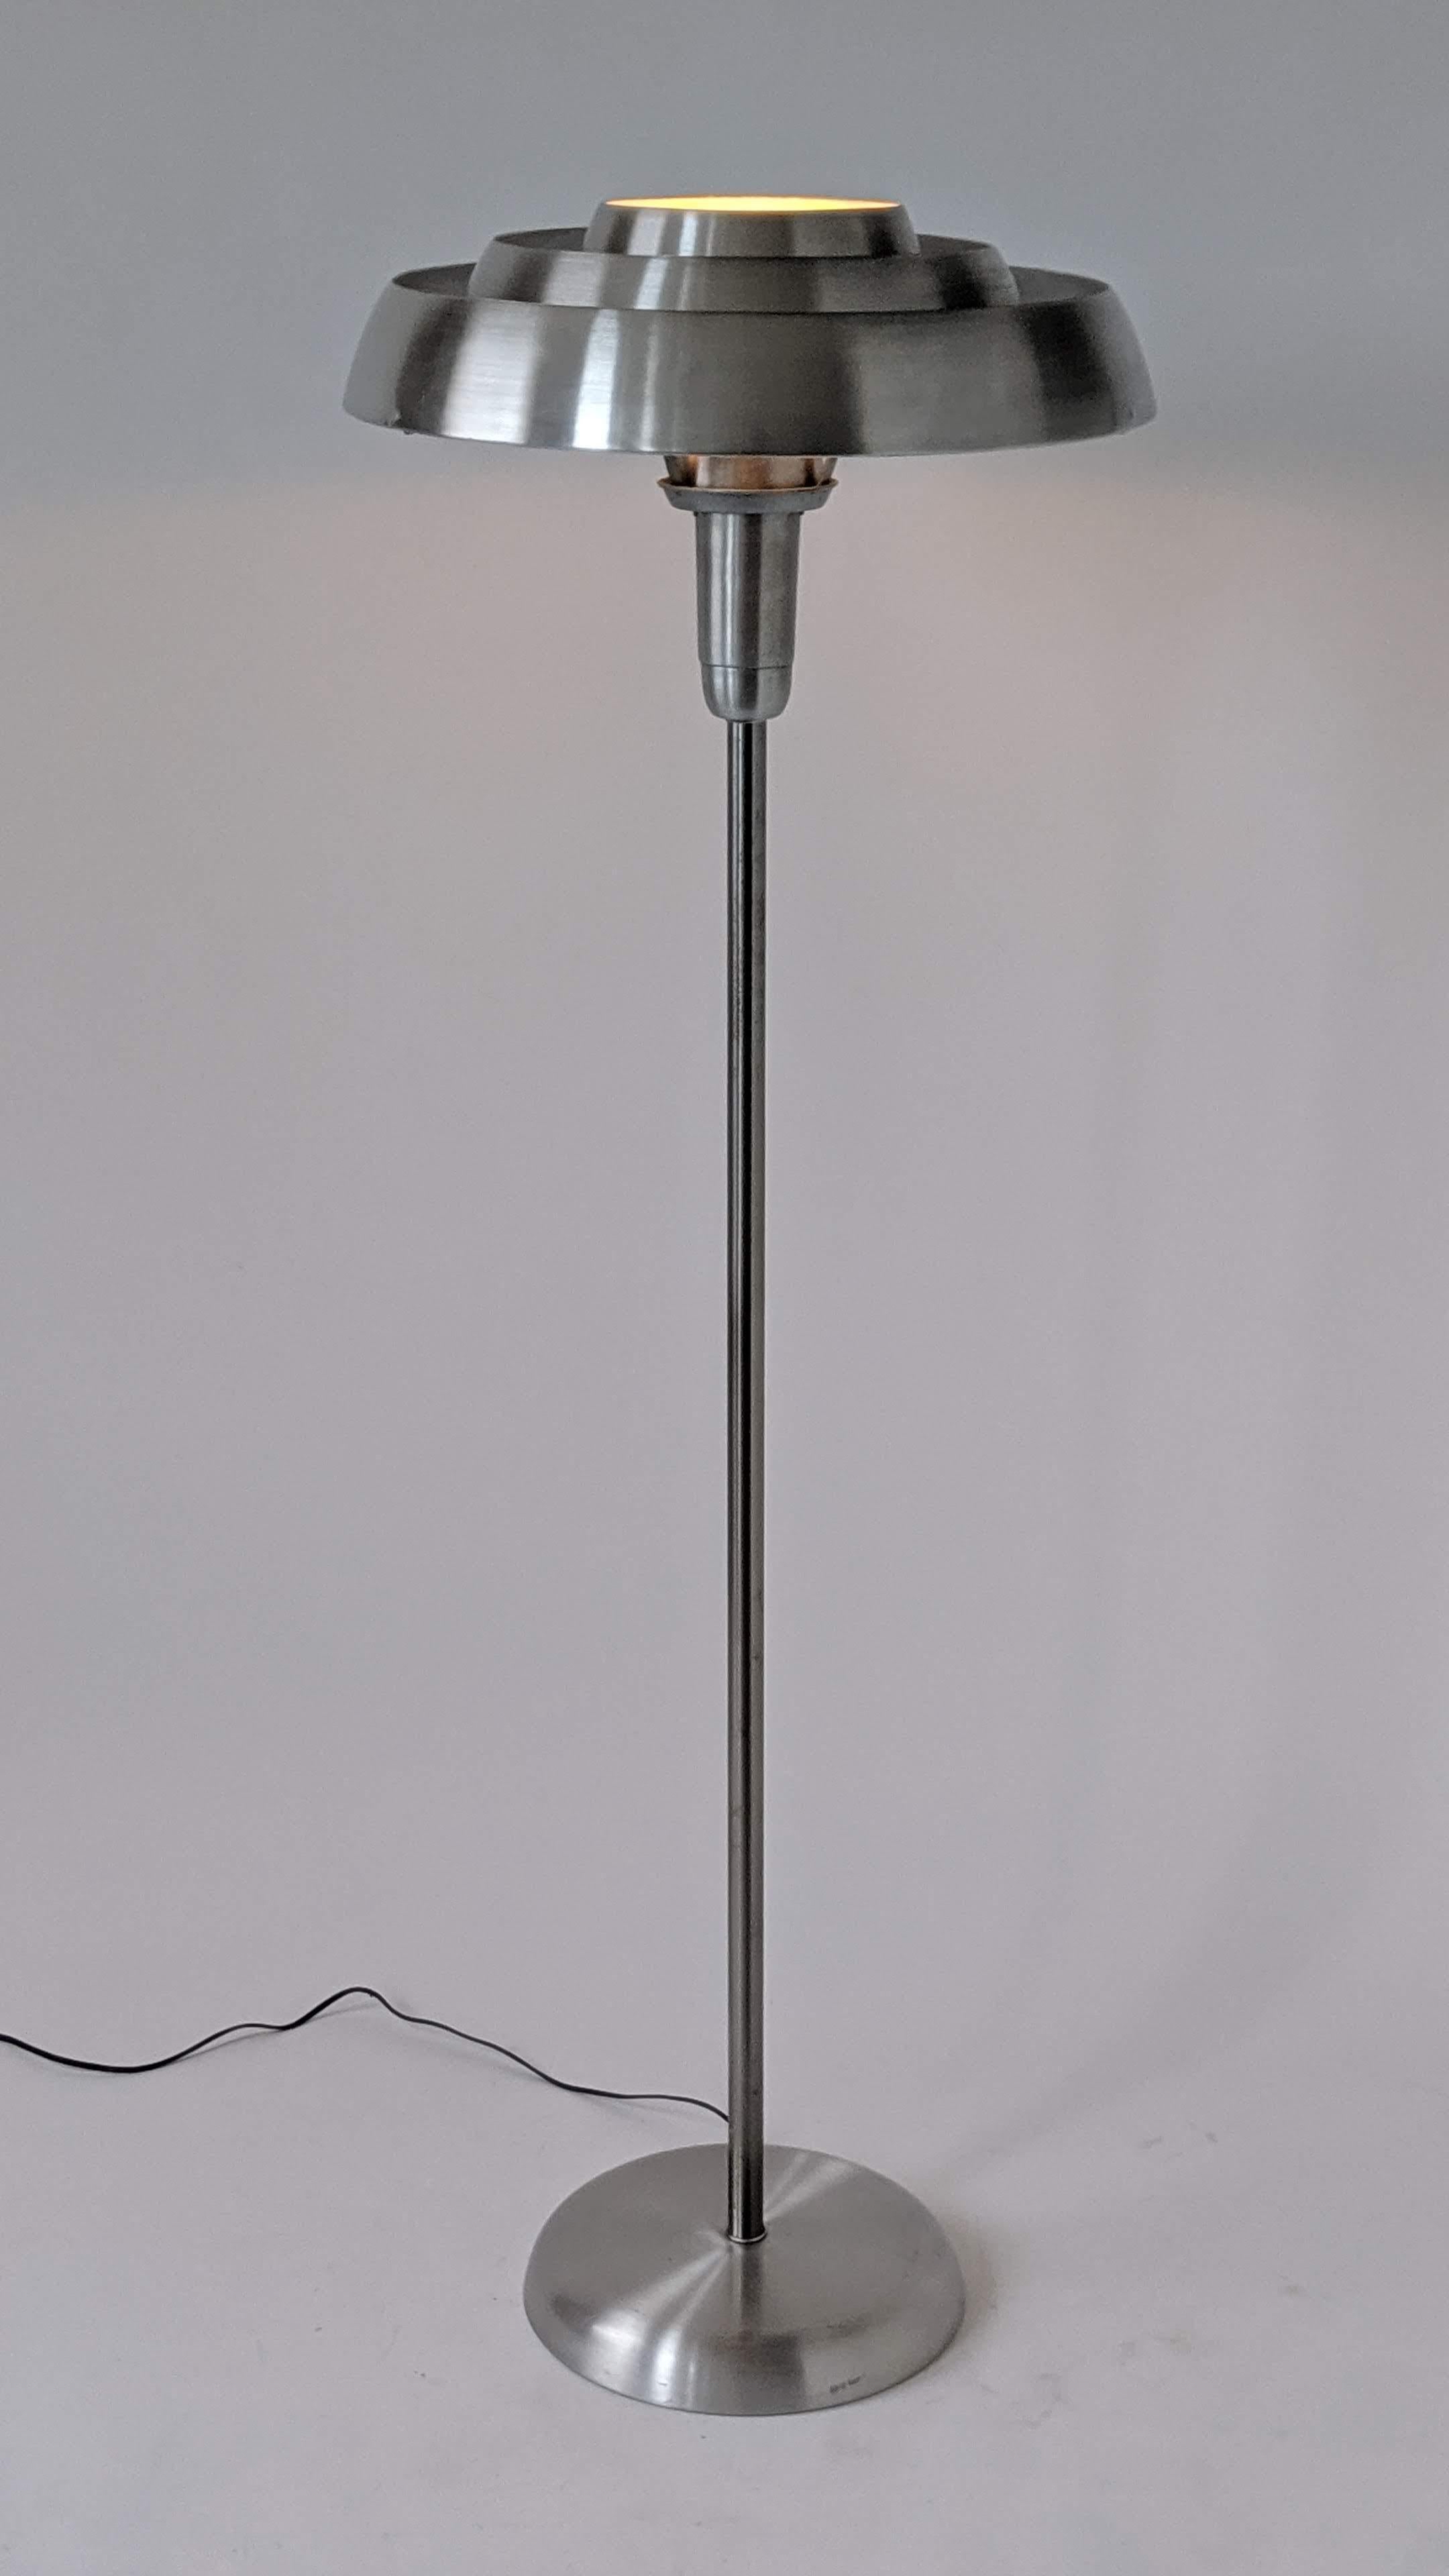 Bold futuristic Art Deco, machine age, streamline floor lamp.

The stacked ring provide an indirect lighting.

Well designed solid construction made of brushed spun aluminium.

Contain one E26 size socket rated at 300 watt.

Second floor